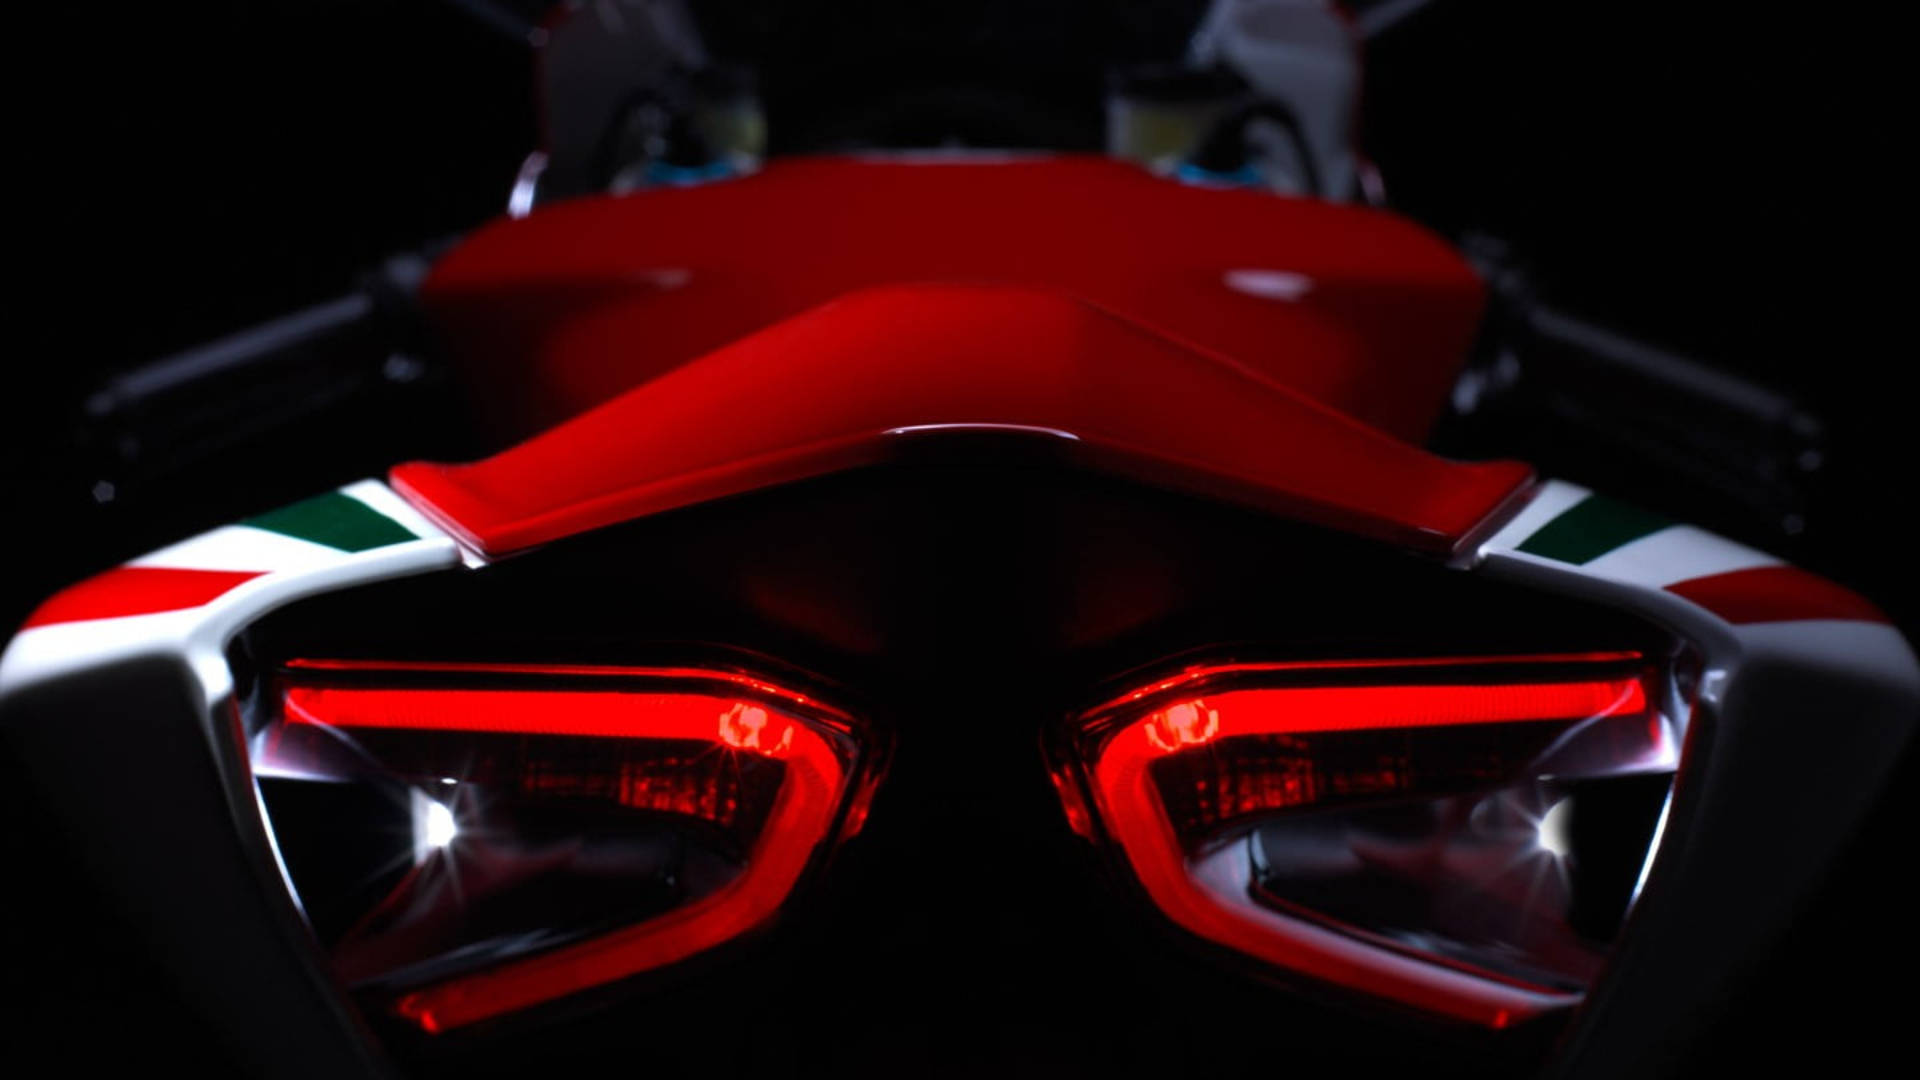 The Powerful 2012 Ducati 1199 Background